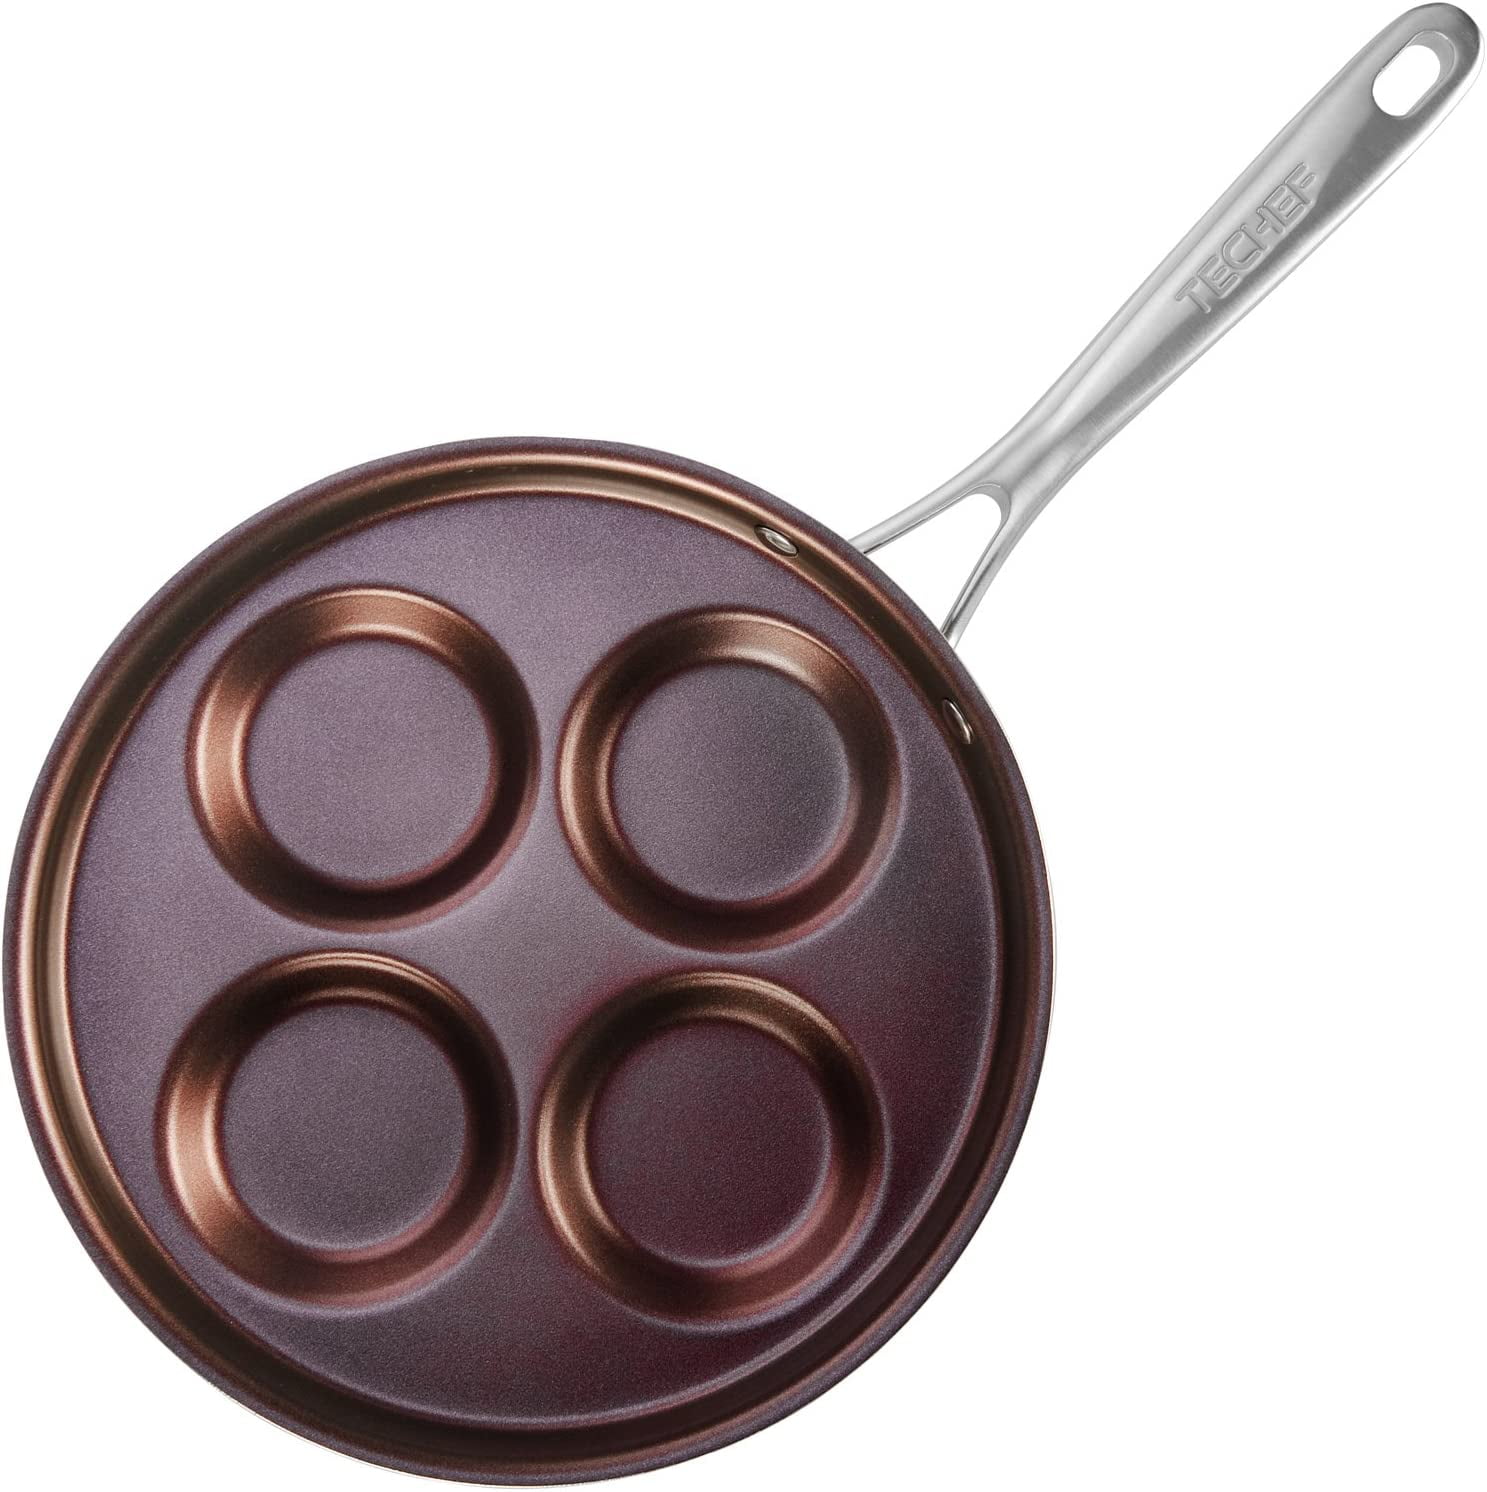 Pancake pan "TWIN® Specials", 24 cm, stainless steel, stainless,  thermolon (ceramic coating) - 